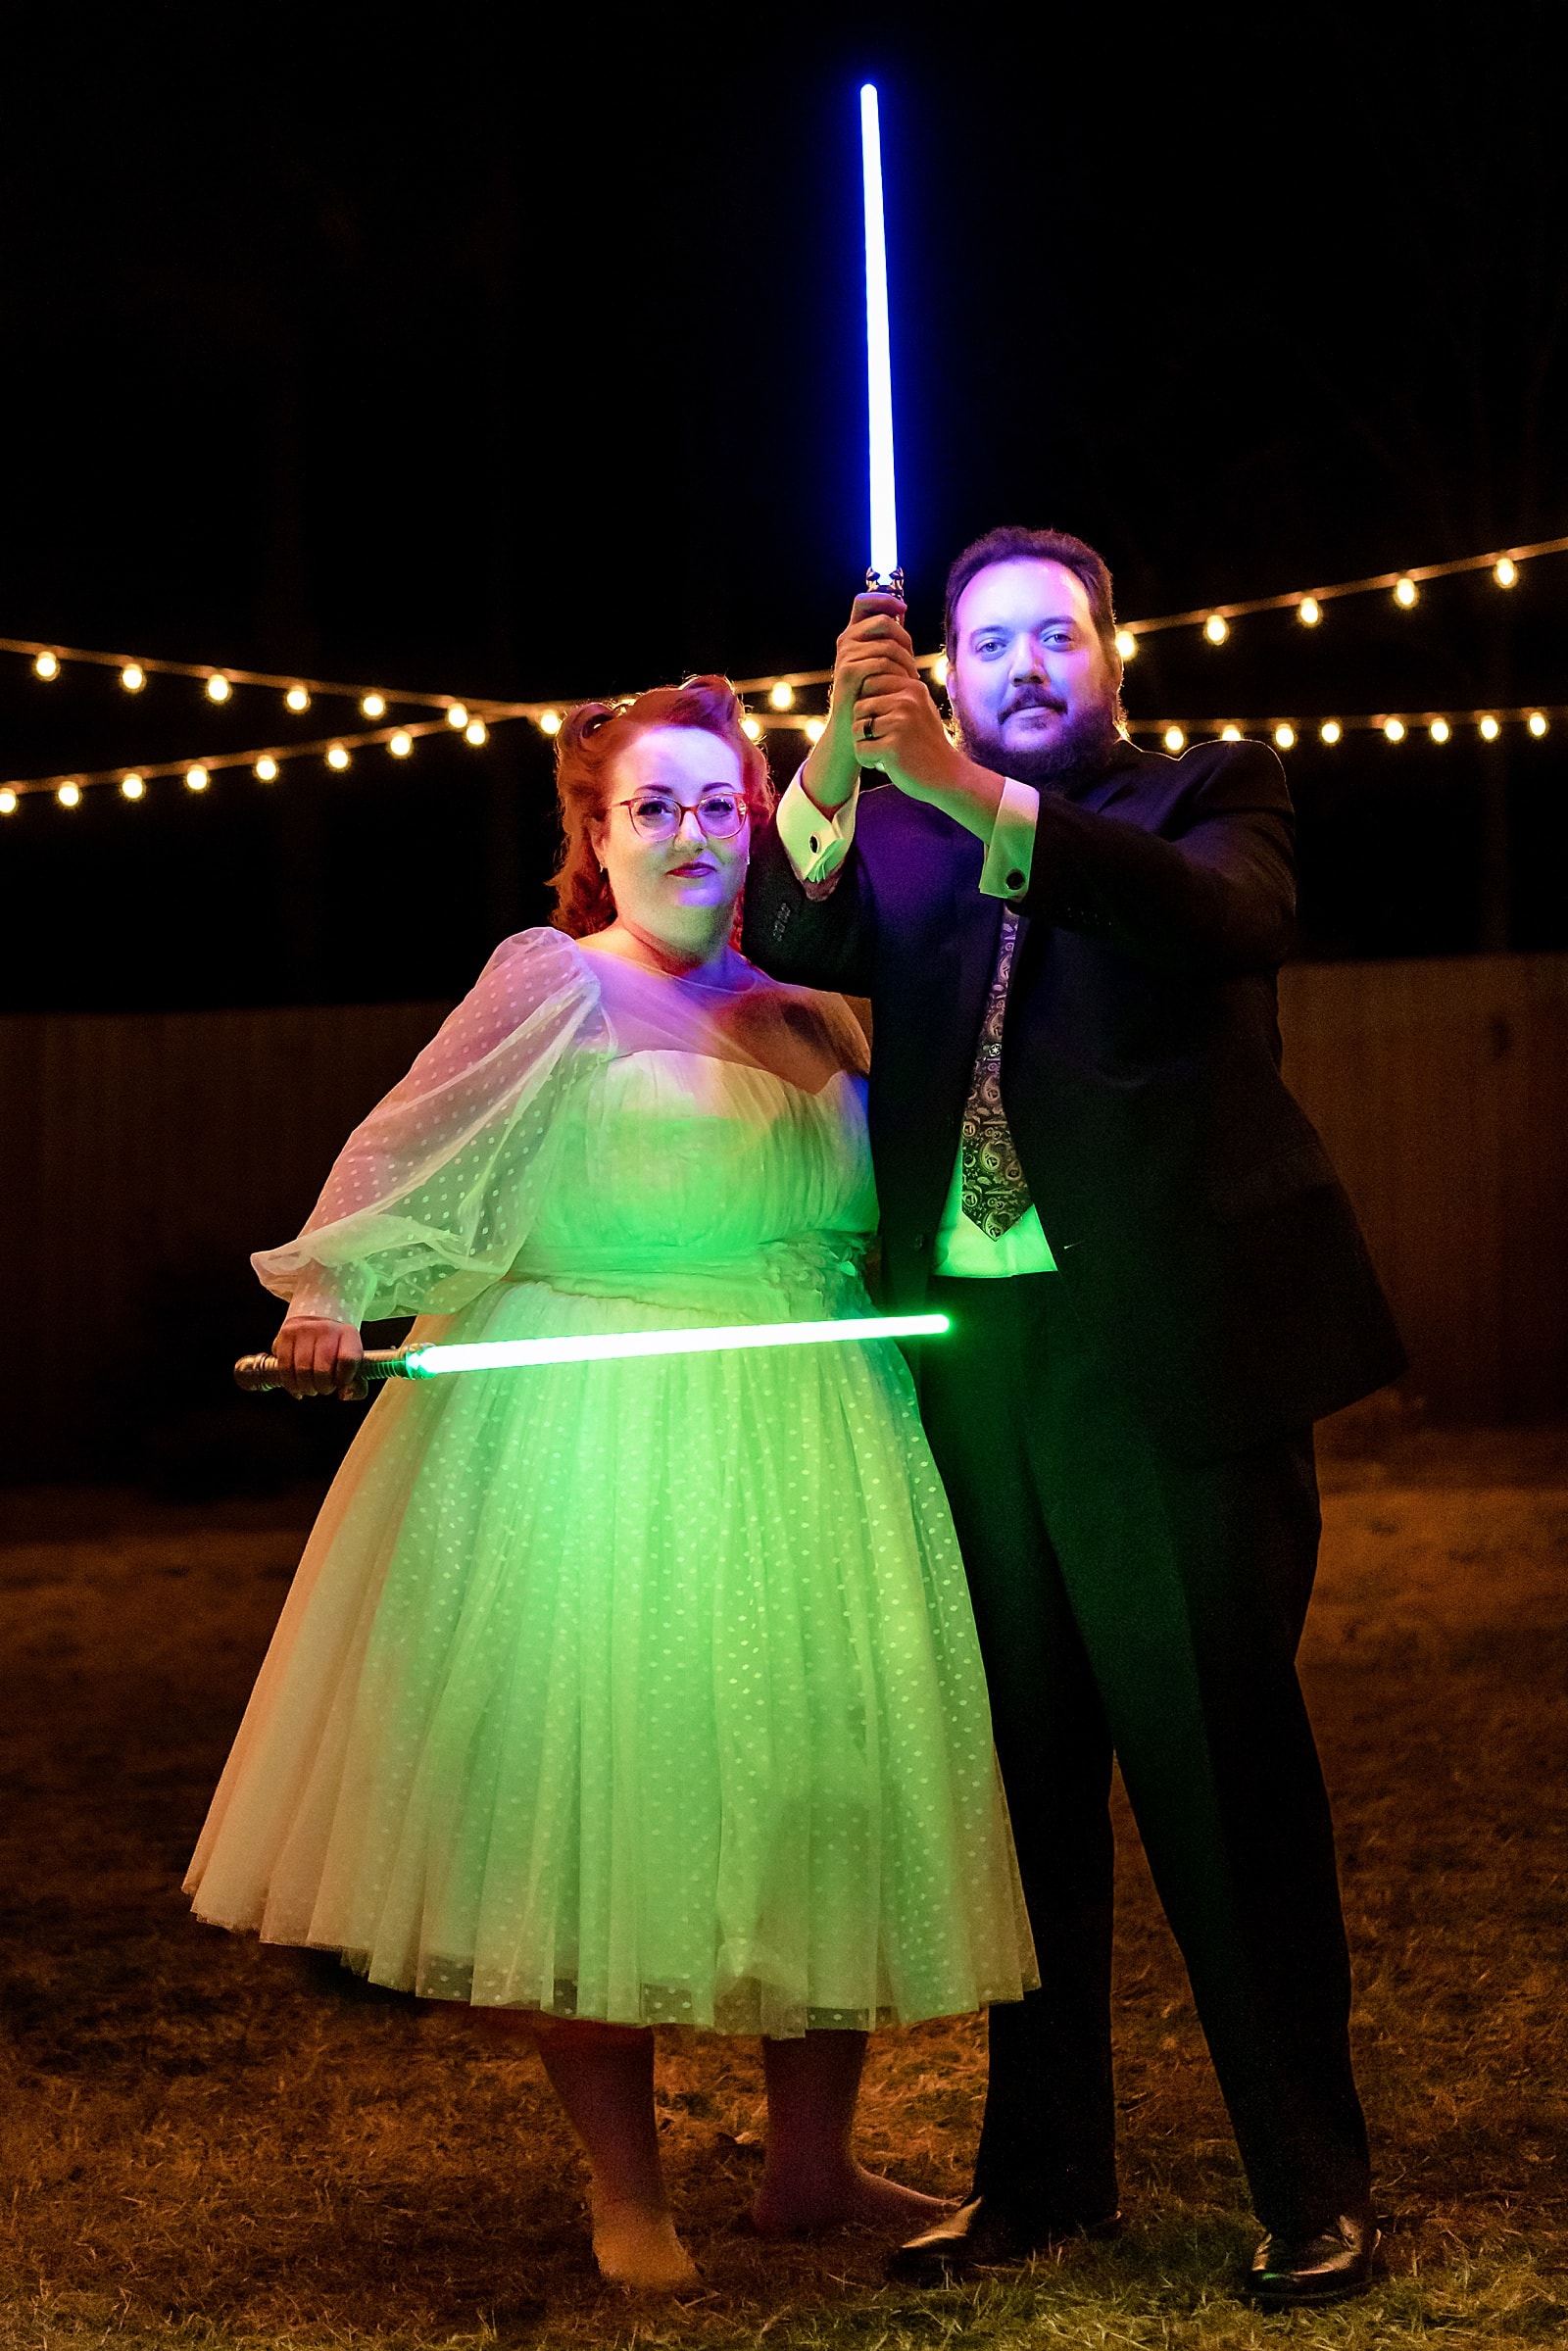 Nerdy wedding with light saber and rainbow details